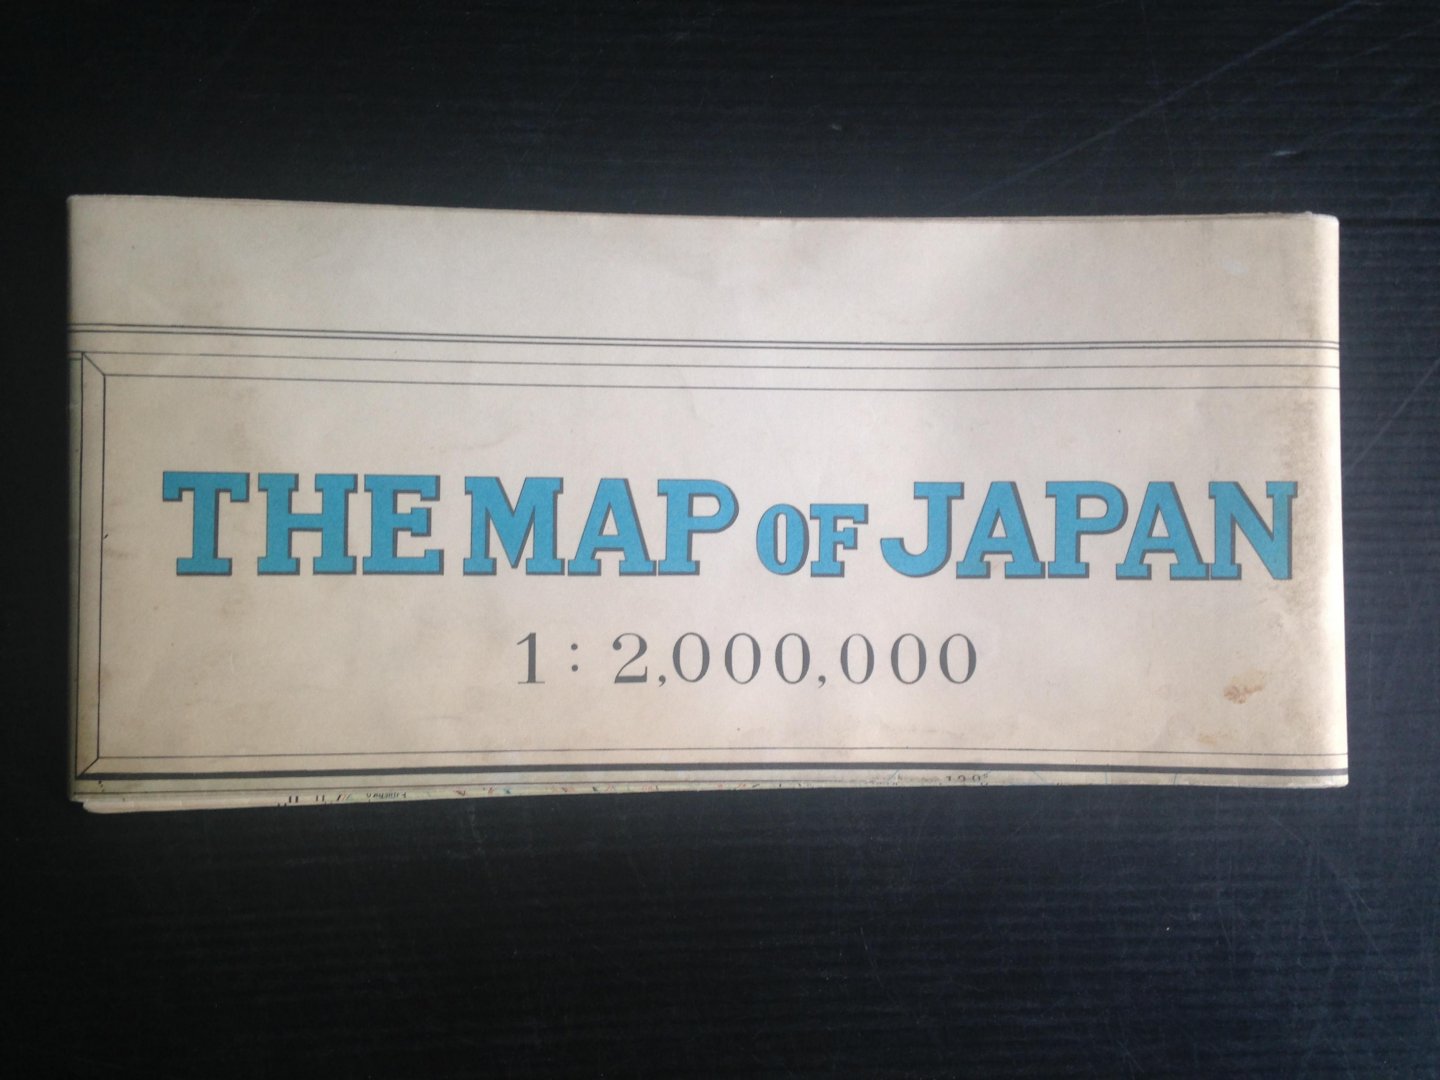  - The map of Japan, 1: 2,000,000